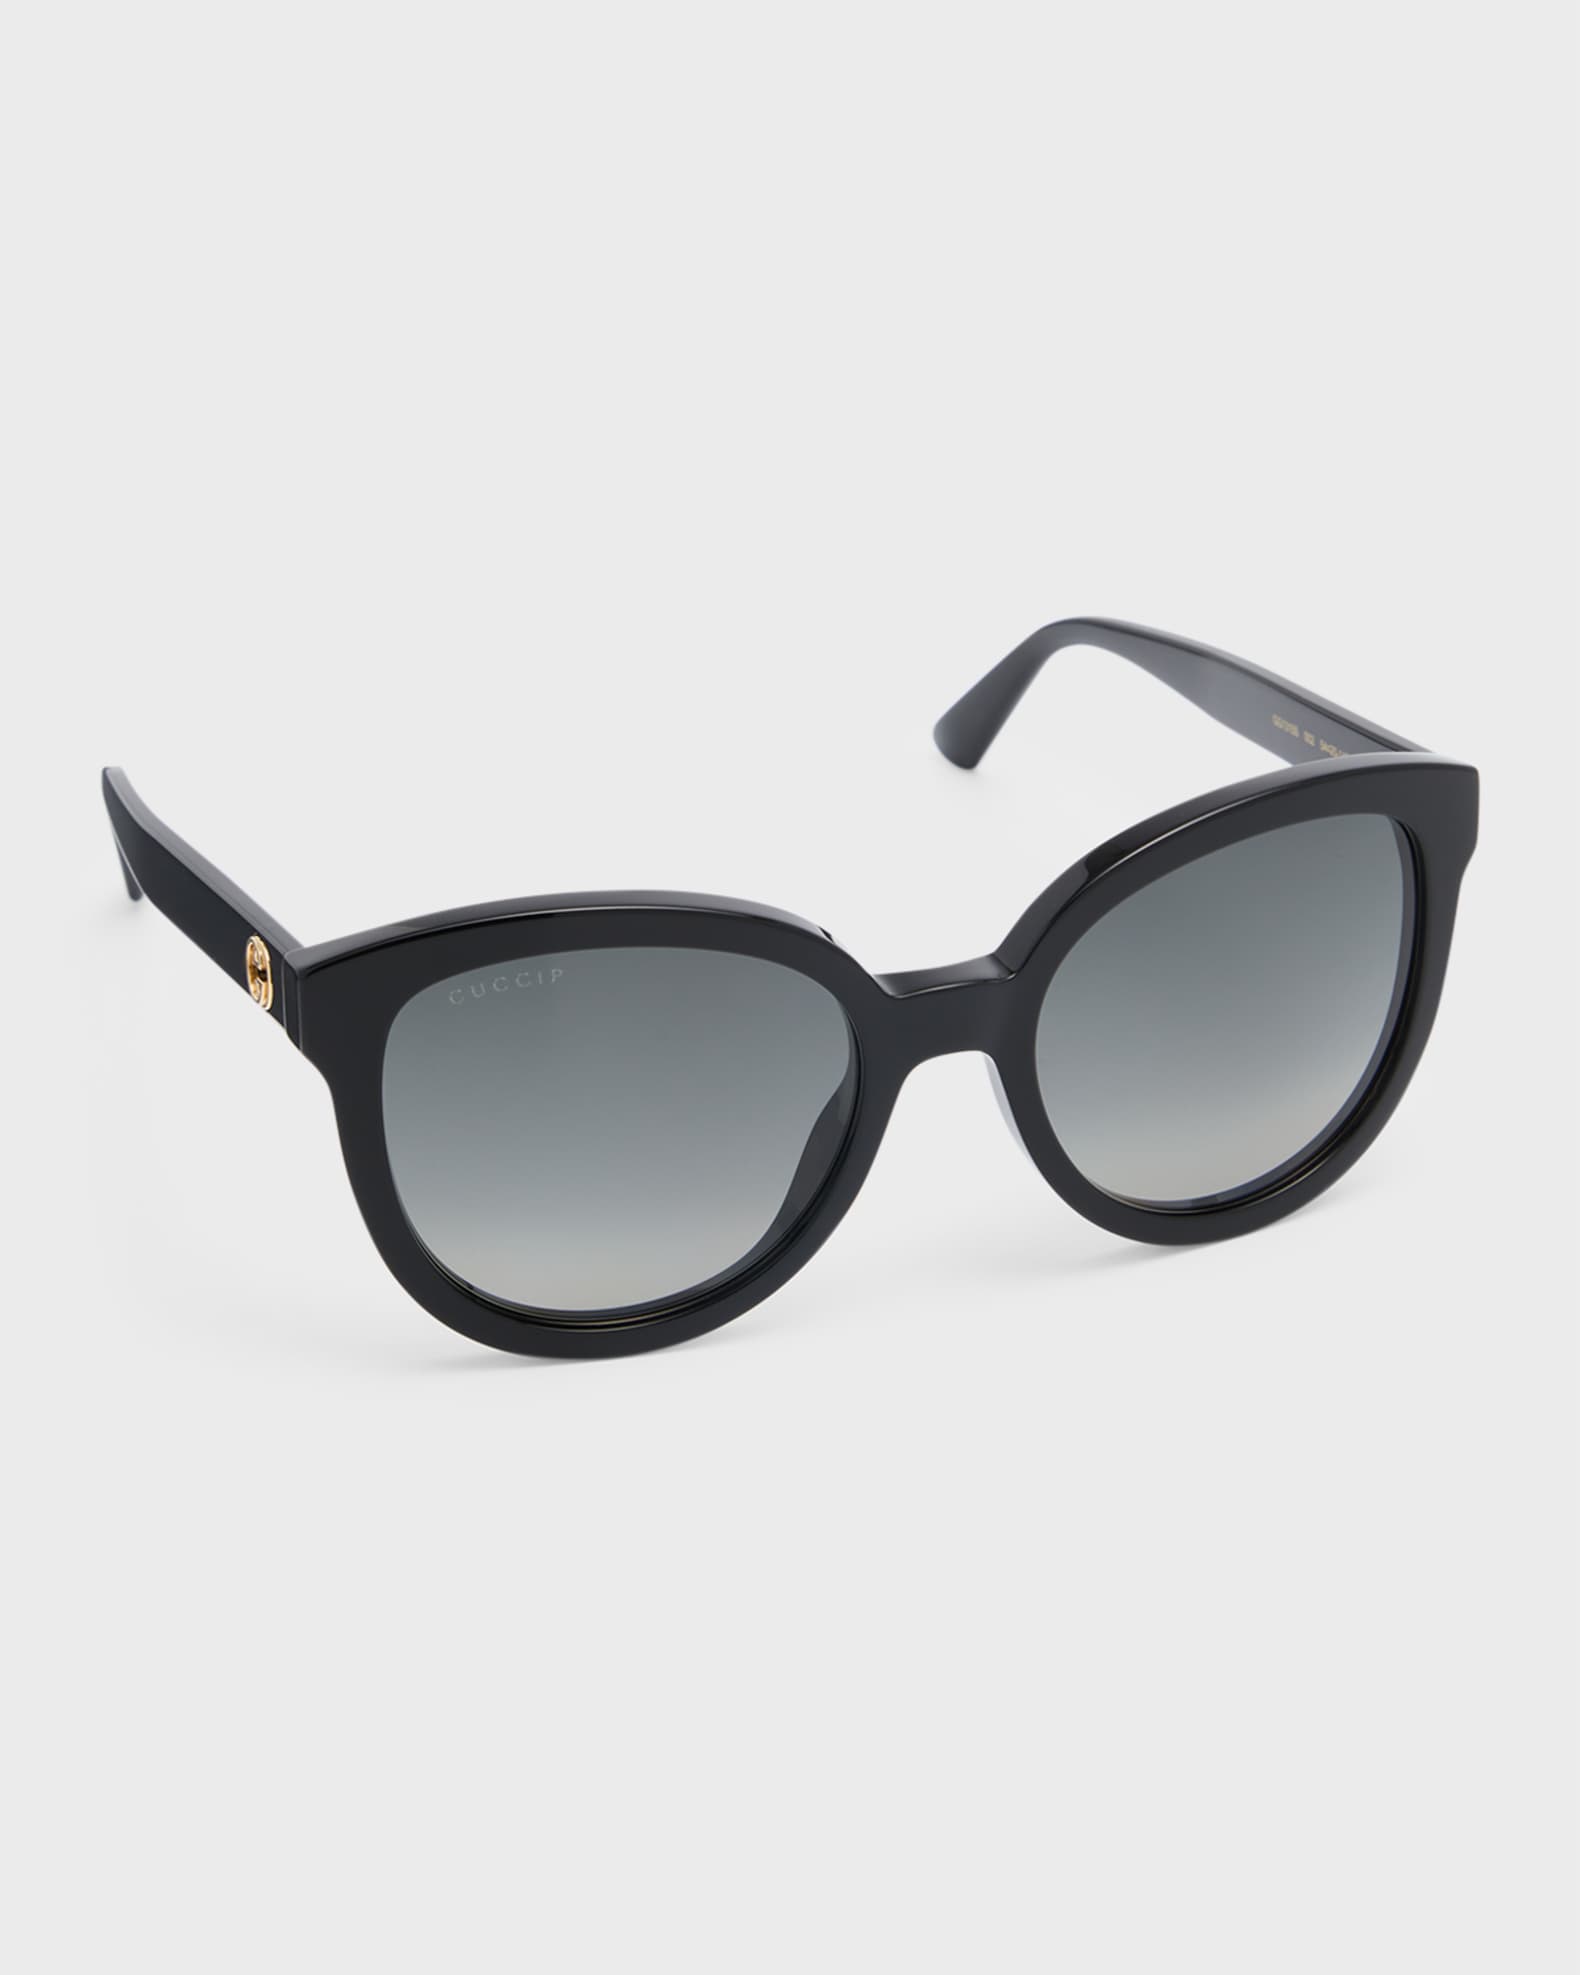 Classic And Trendy Polarized Sunglasses With Sports Strap In Black Color,  Suitable For Both Men And Women. These Luxurious Sports And Vintage Style